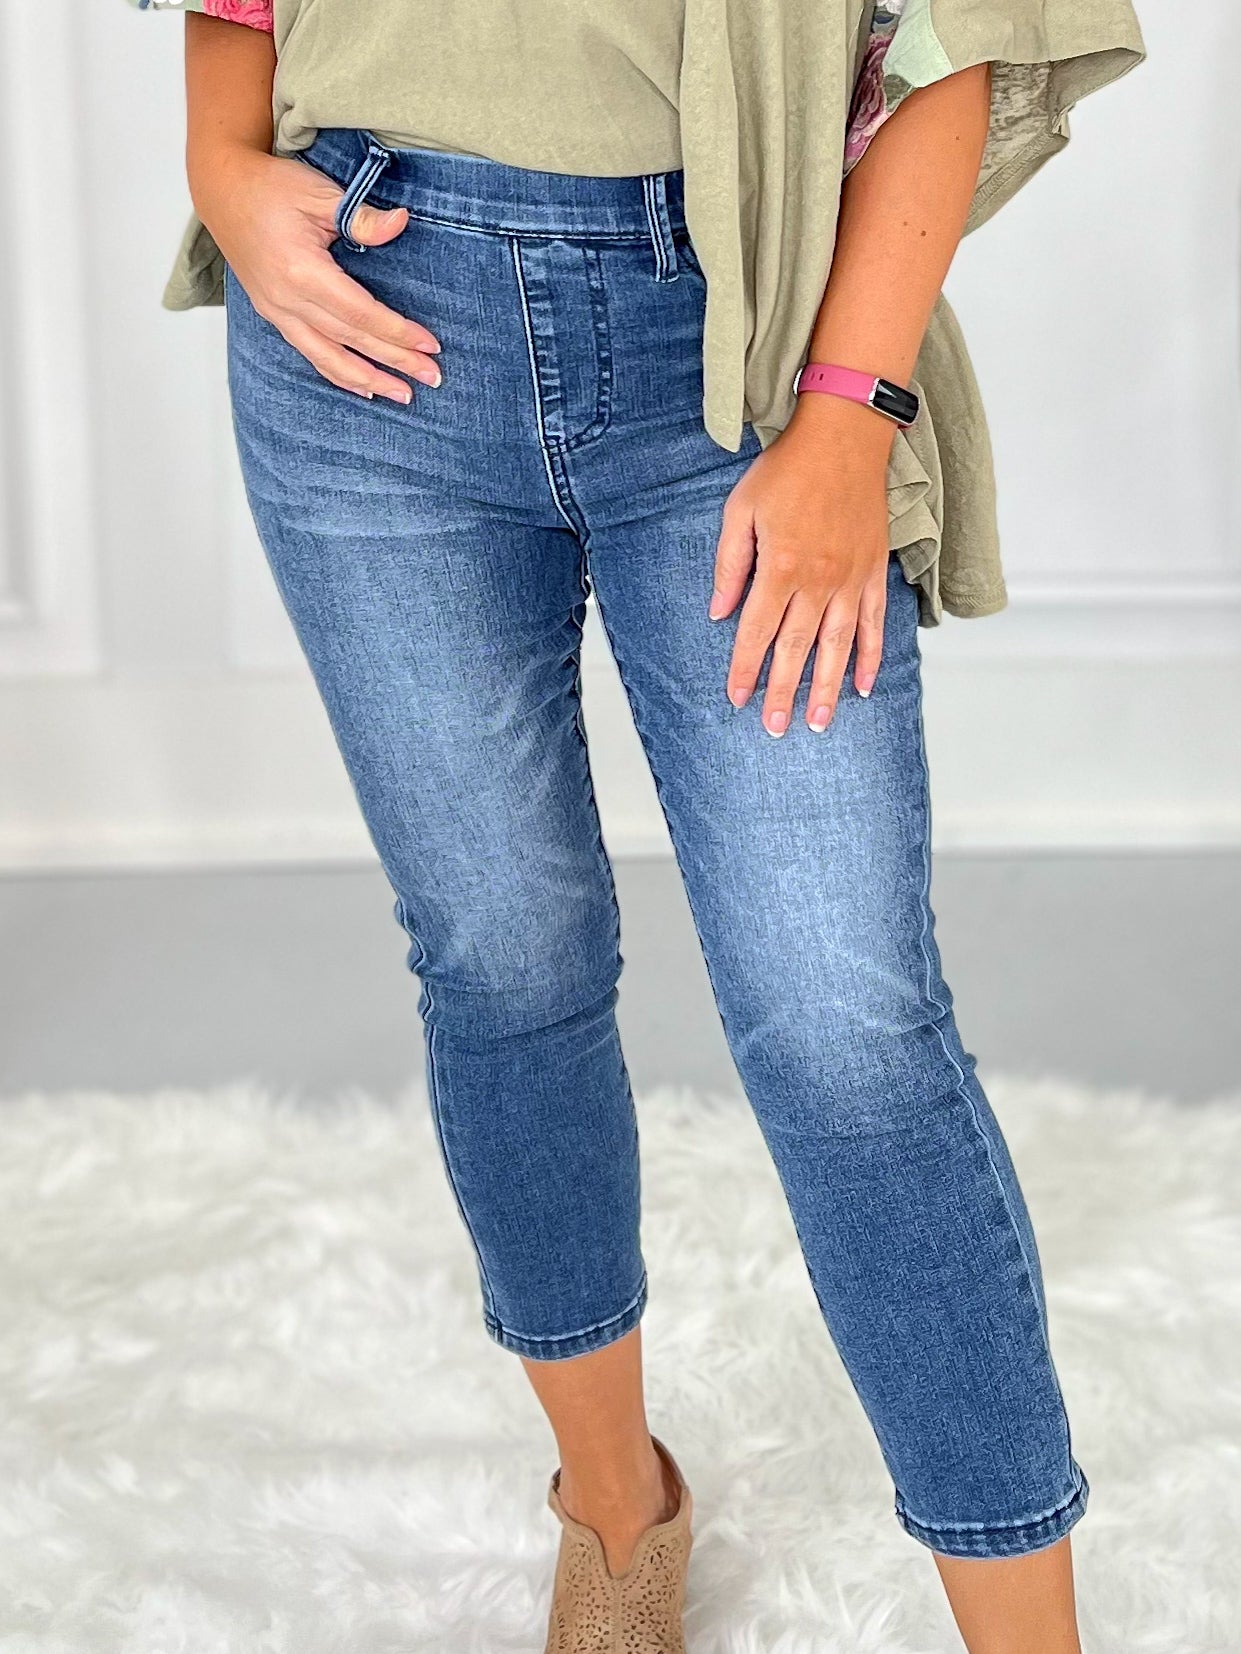 Chill Out - Judy Blue Cool Denim Pull On Capris - Final Sale